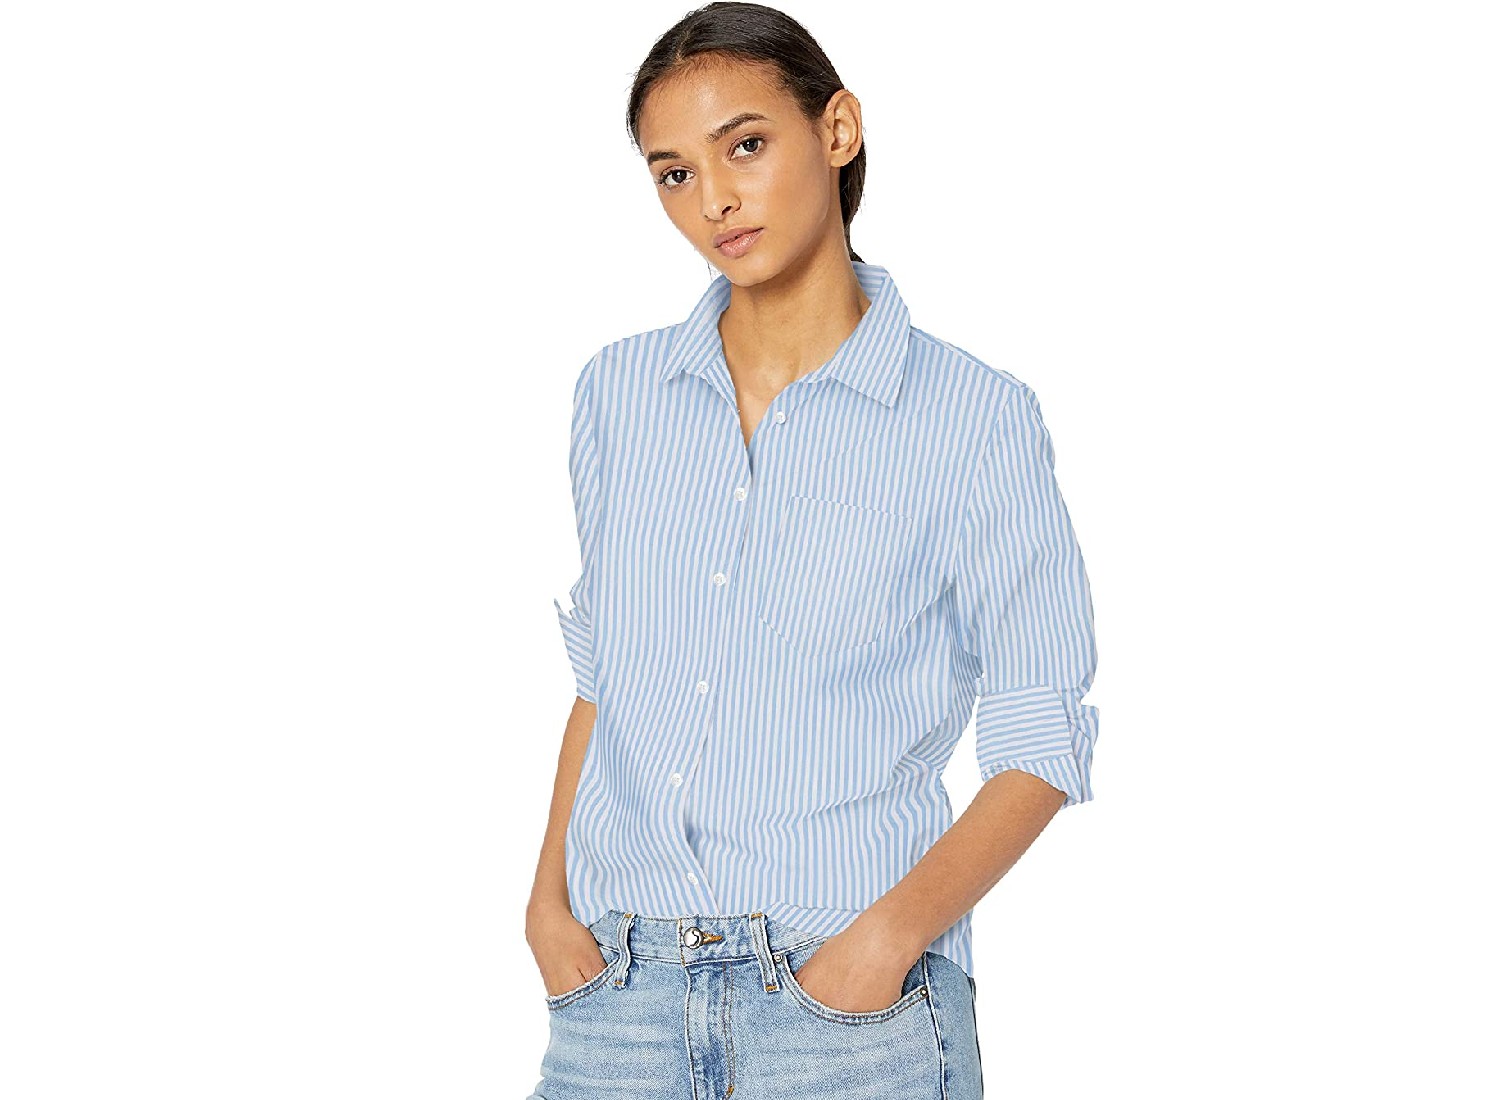 A blue and white striped shirt.